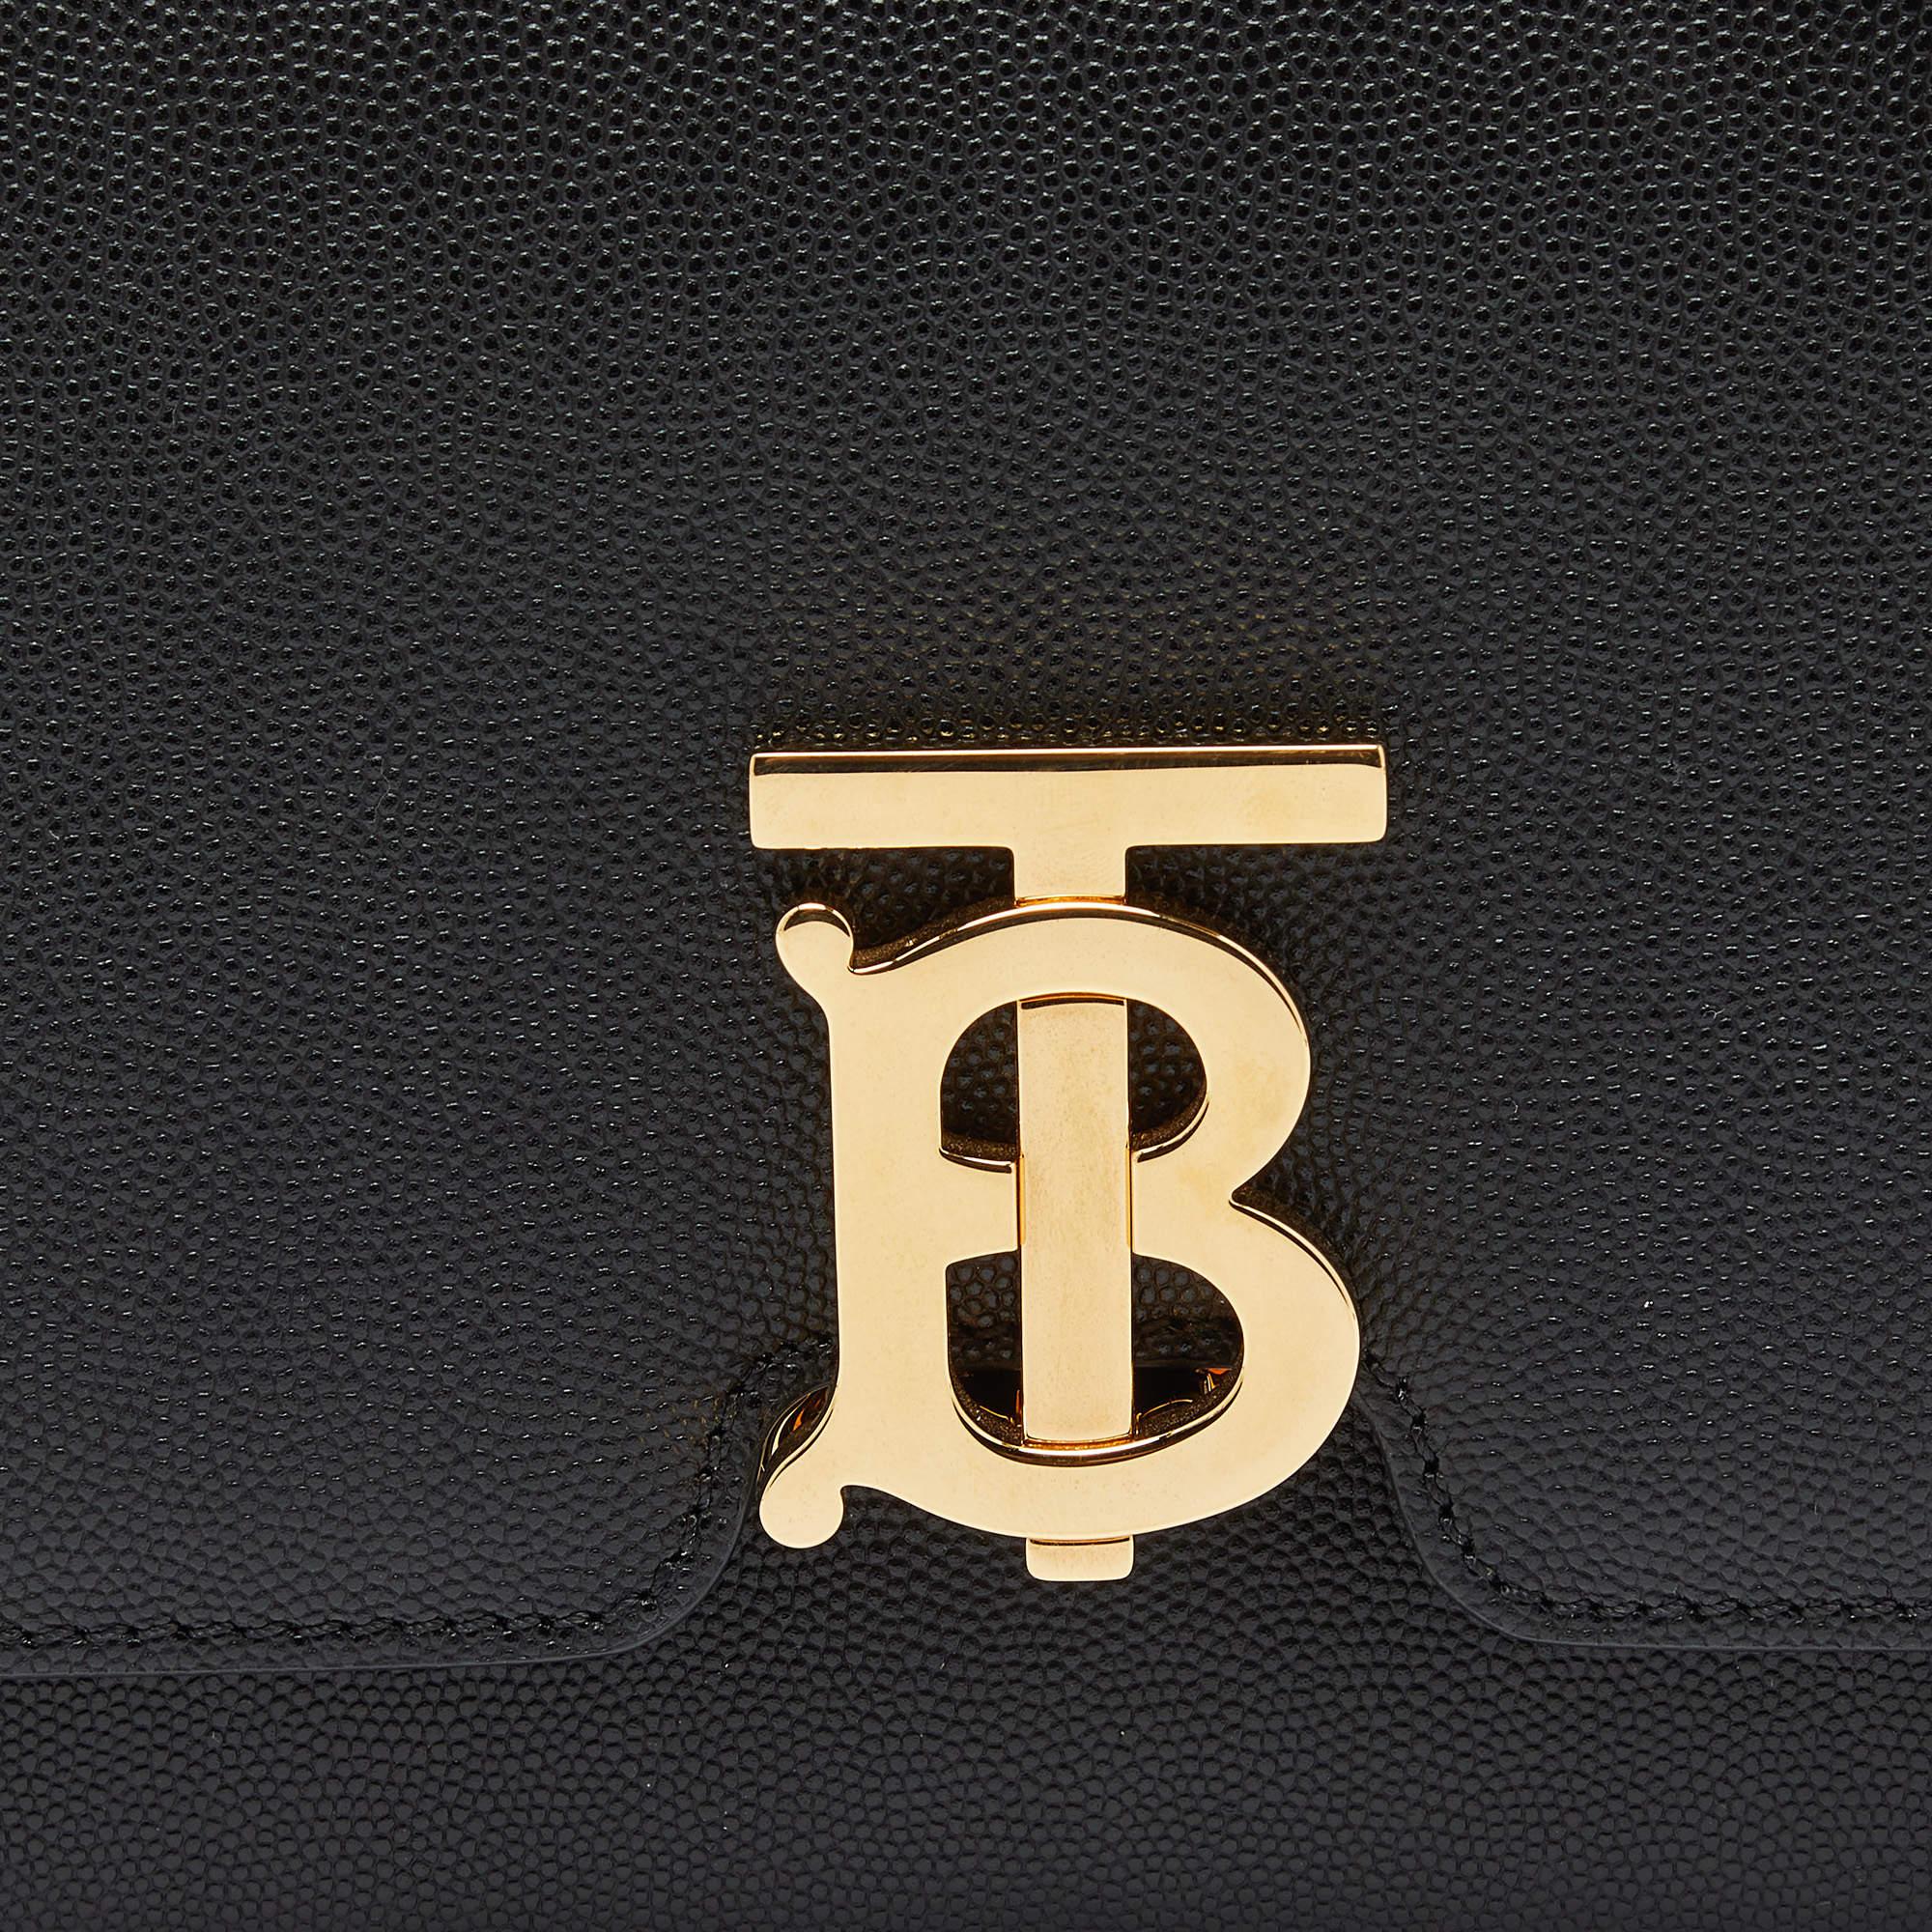 Burberry Black Leather Small TB Shoulder Bag 5